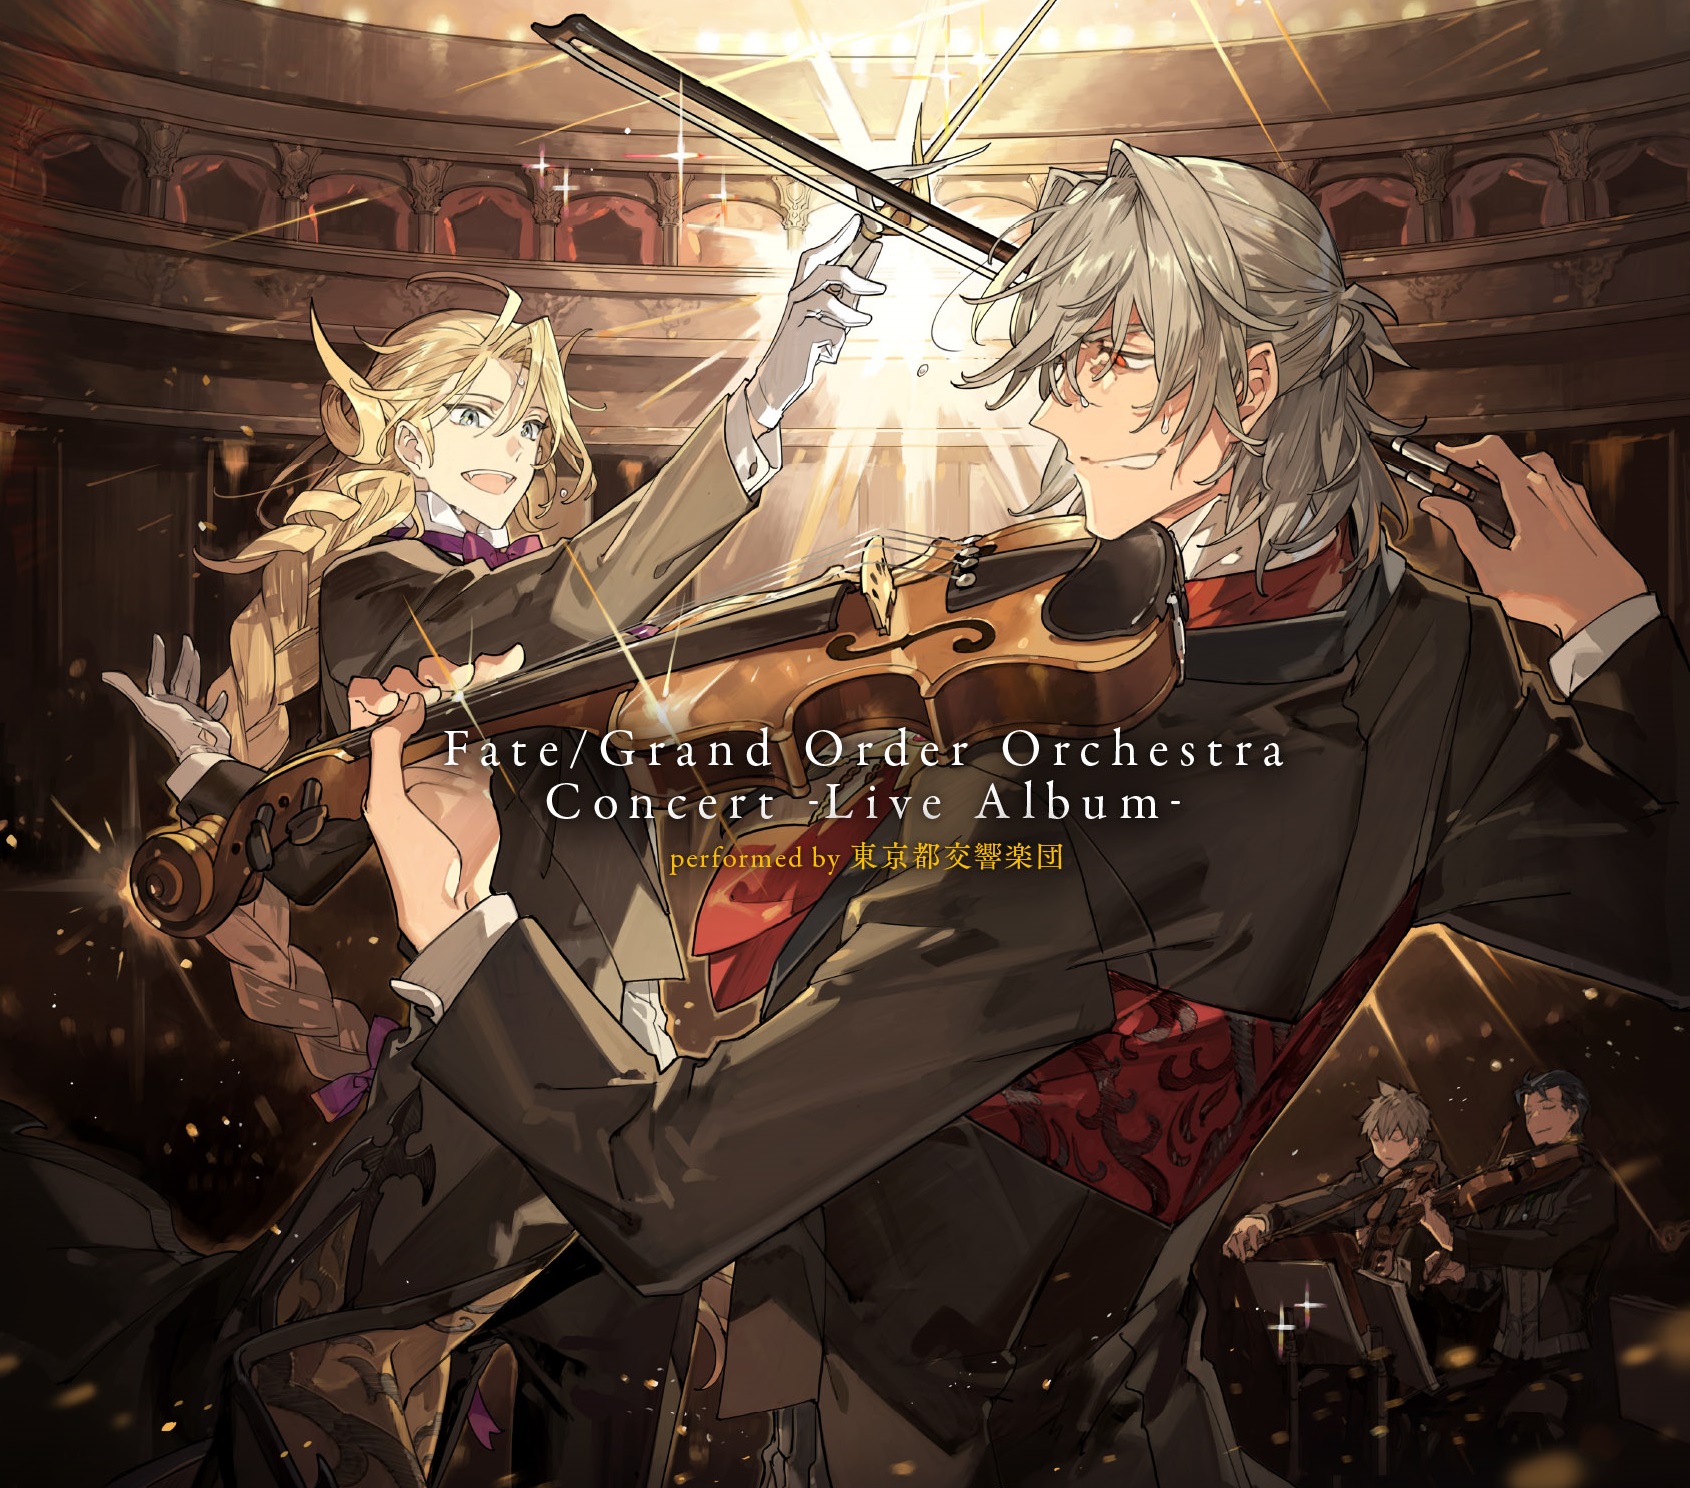 Fate Grand Order Orchestra Concert Live Album Perfomed By 東京都交響楽団の発売が7月31日 水 に決定 株式会社アニプレックスのプレスリリース